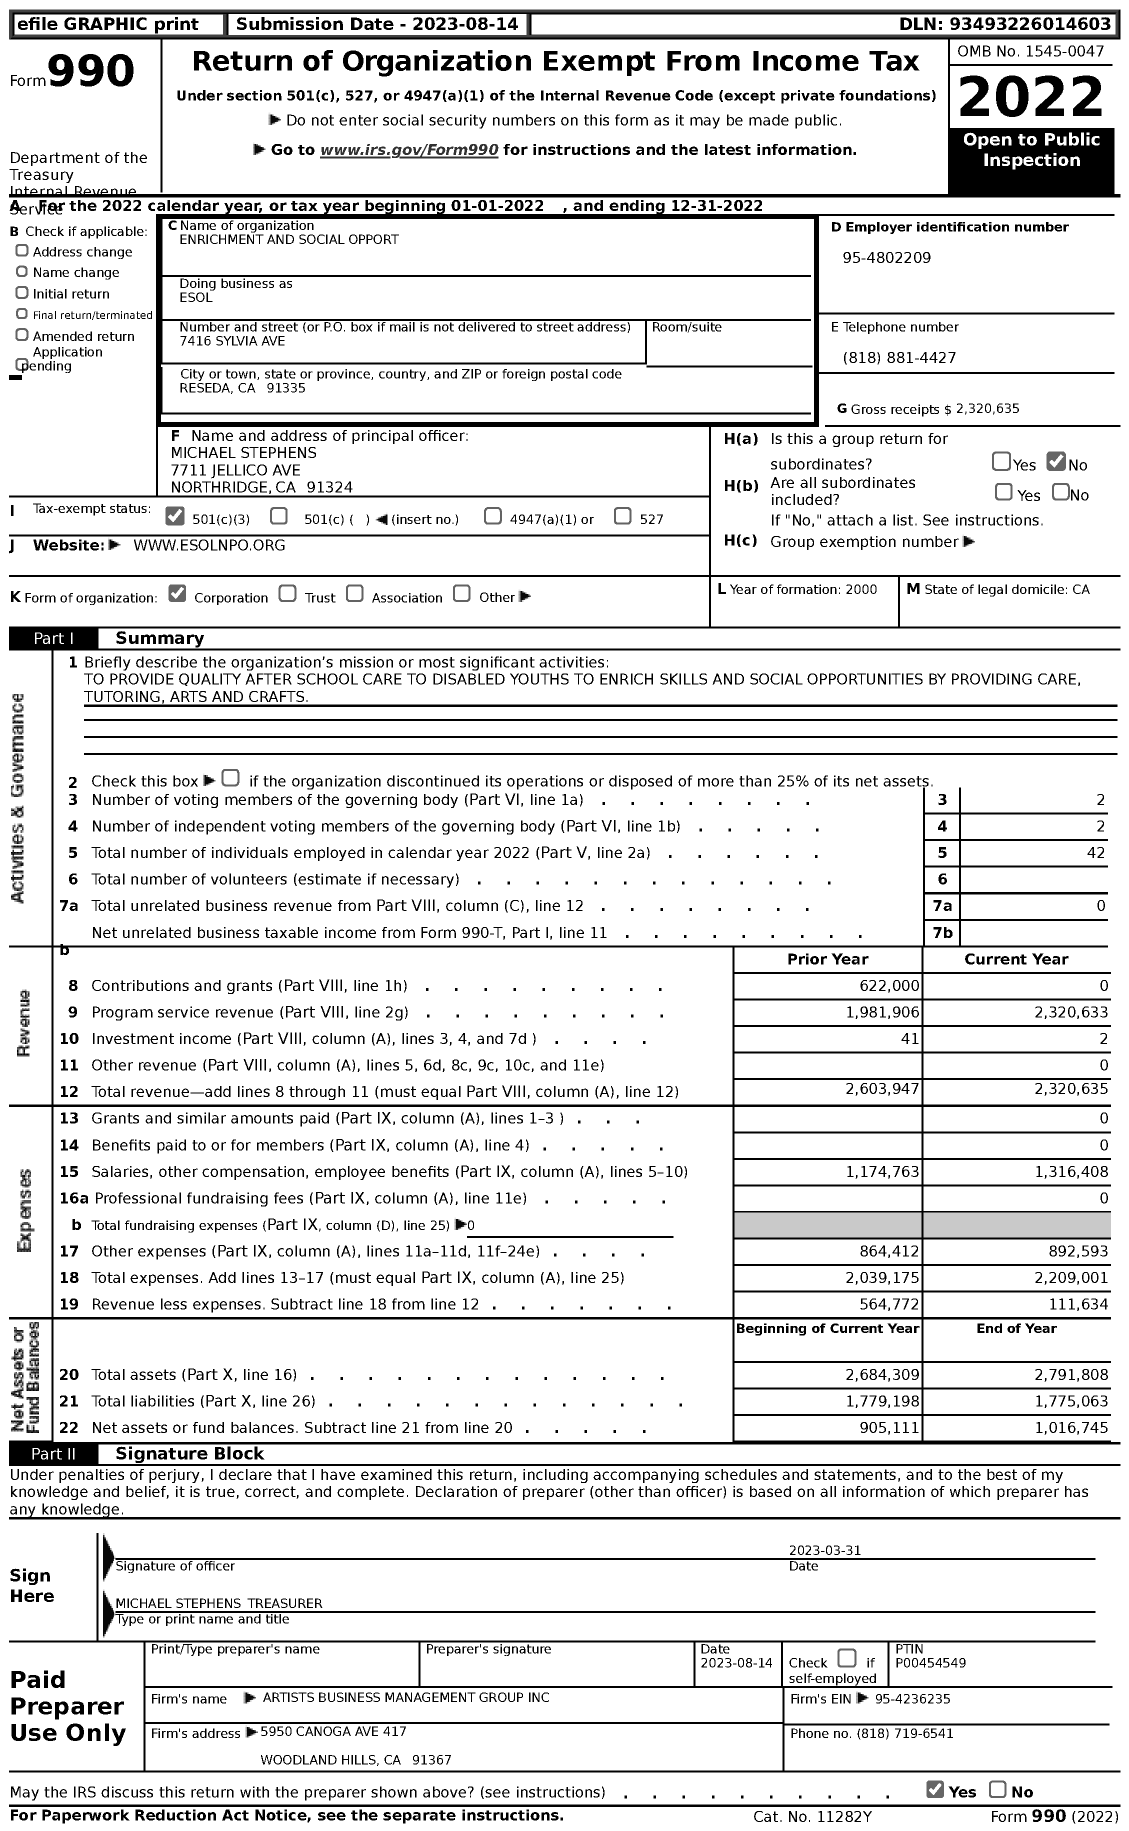 Image of first page of 2022 Form 990 for Enrichment and Social Opport (ESOL)